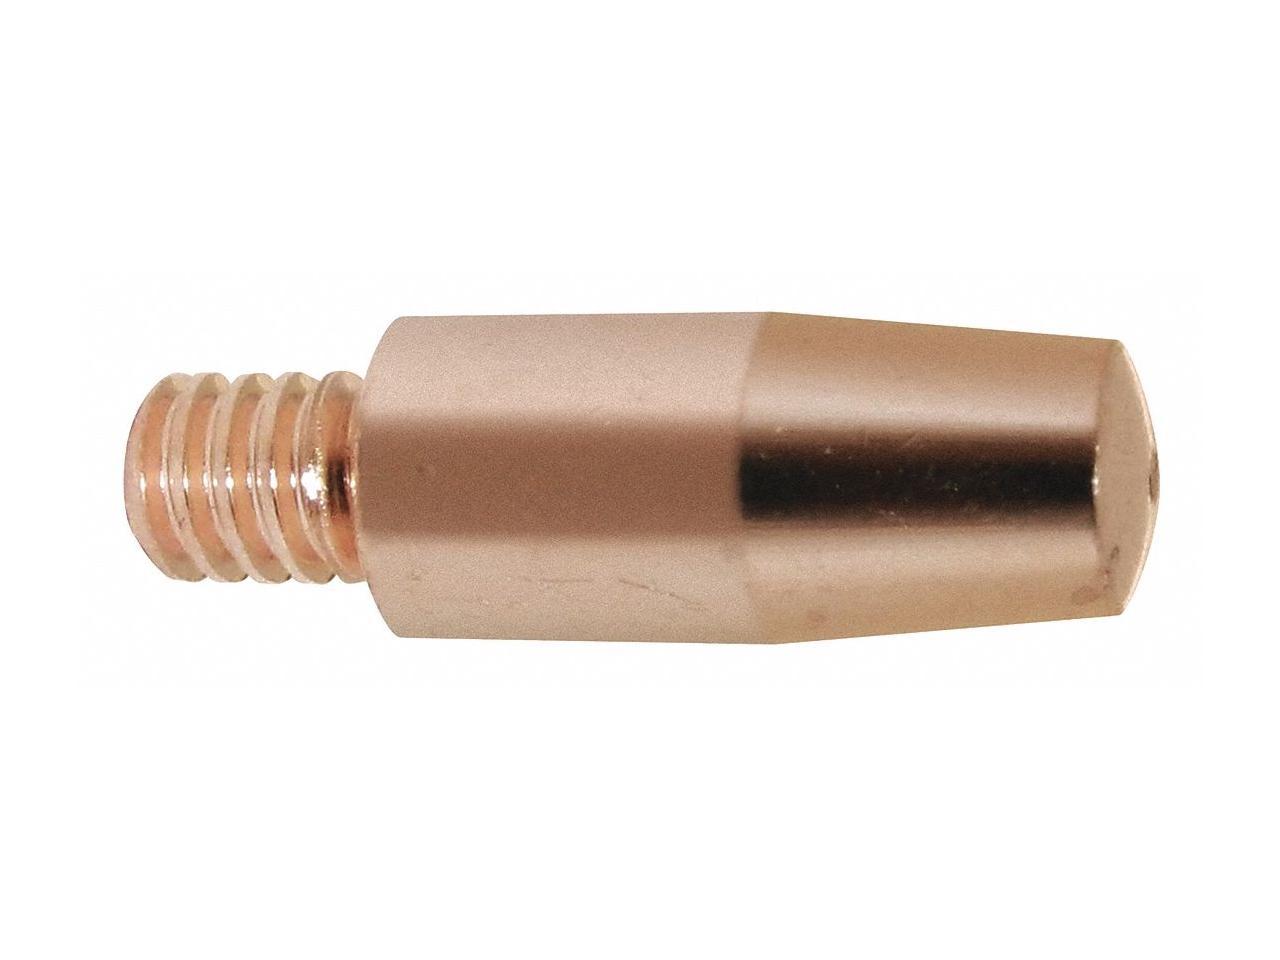 Lincoln Electric KP2745-564 Copper Plus Contact Tip 550A 5/64 in 10 pack 